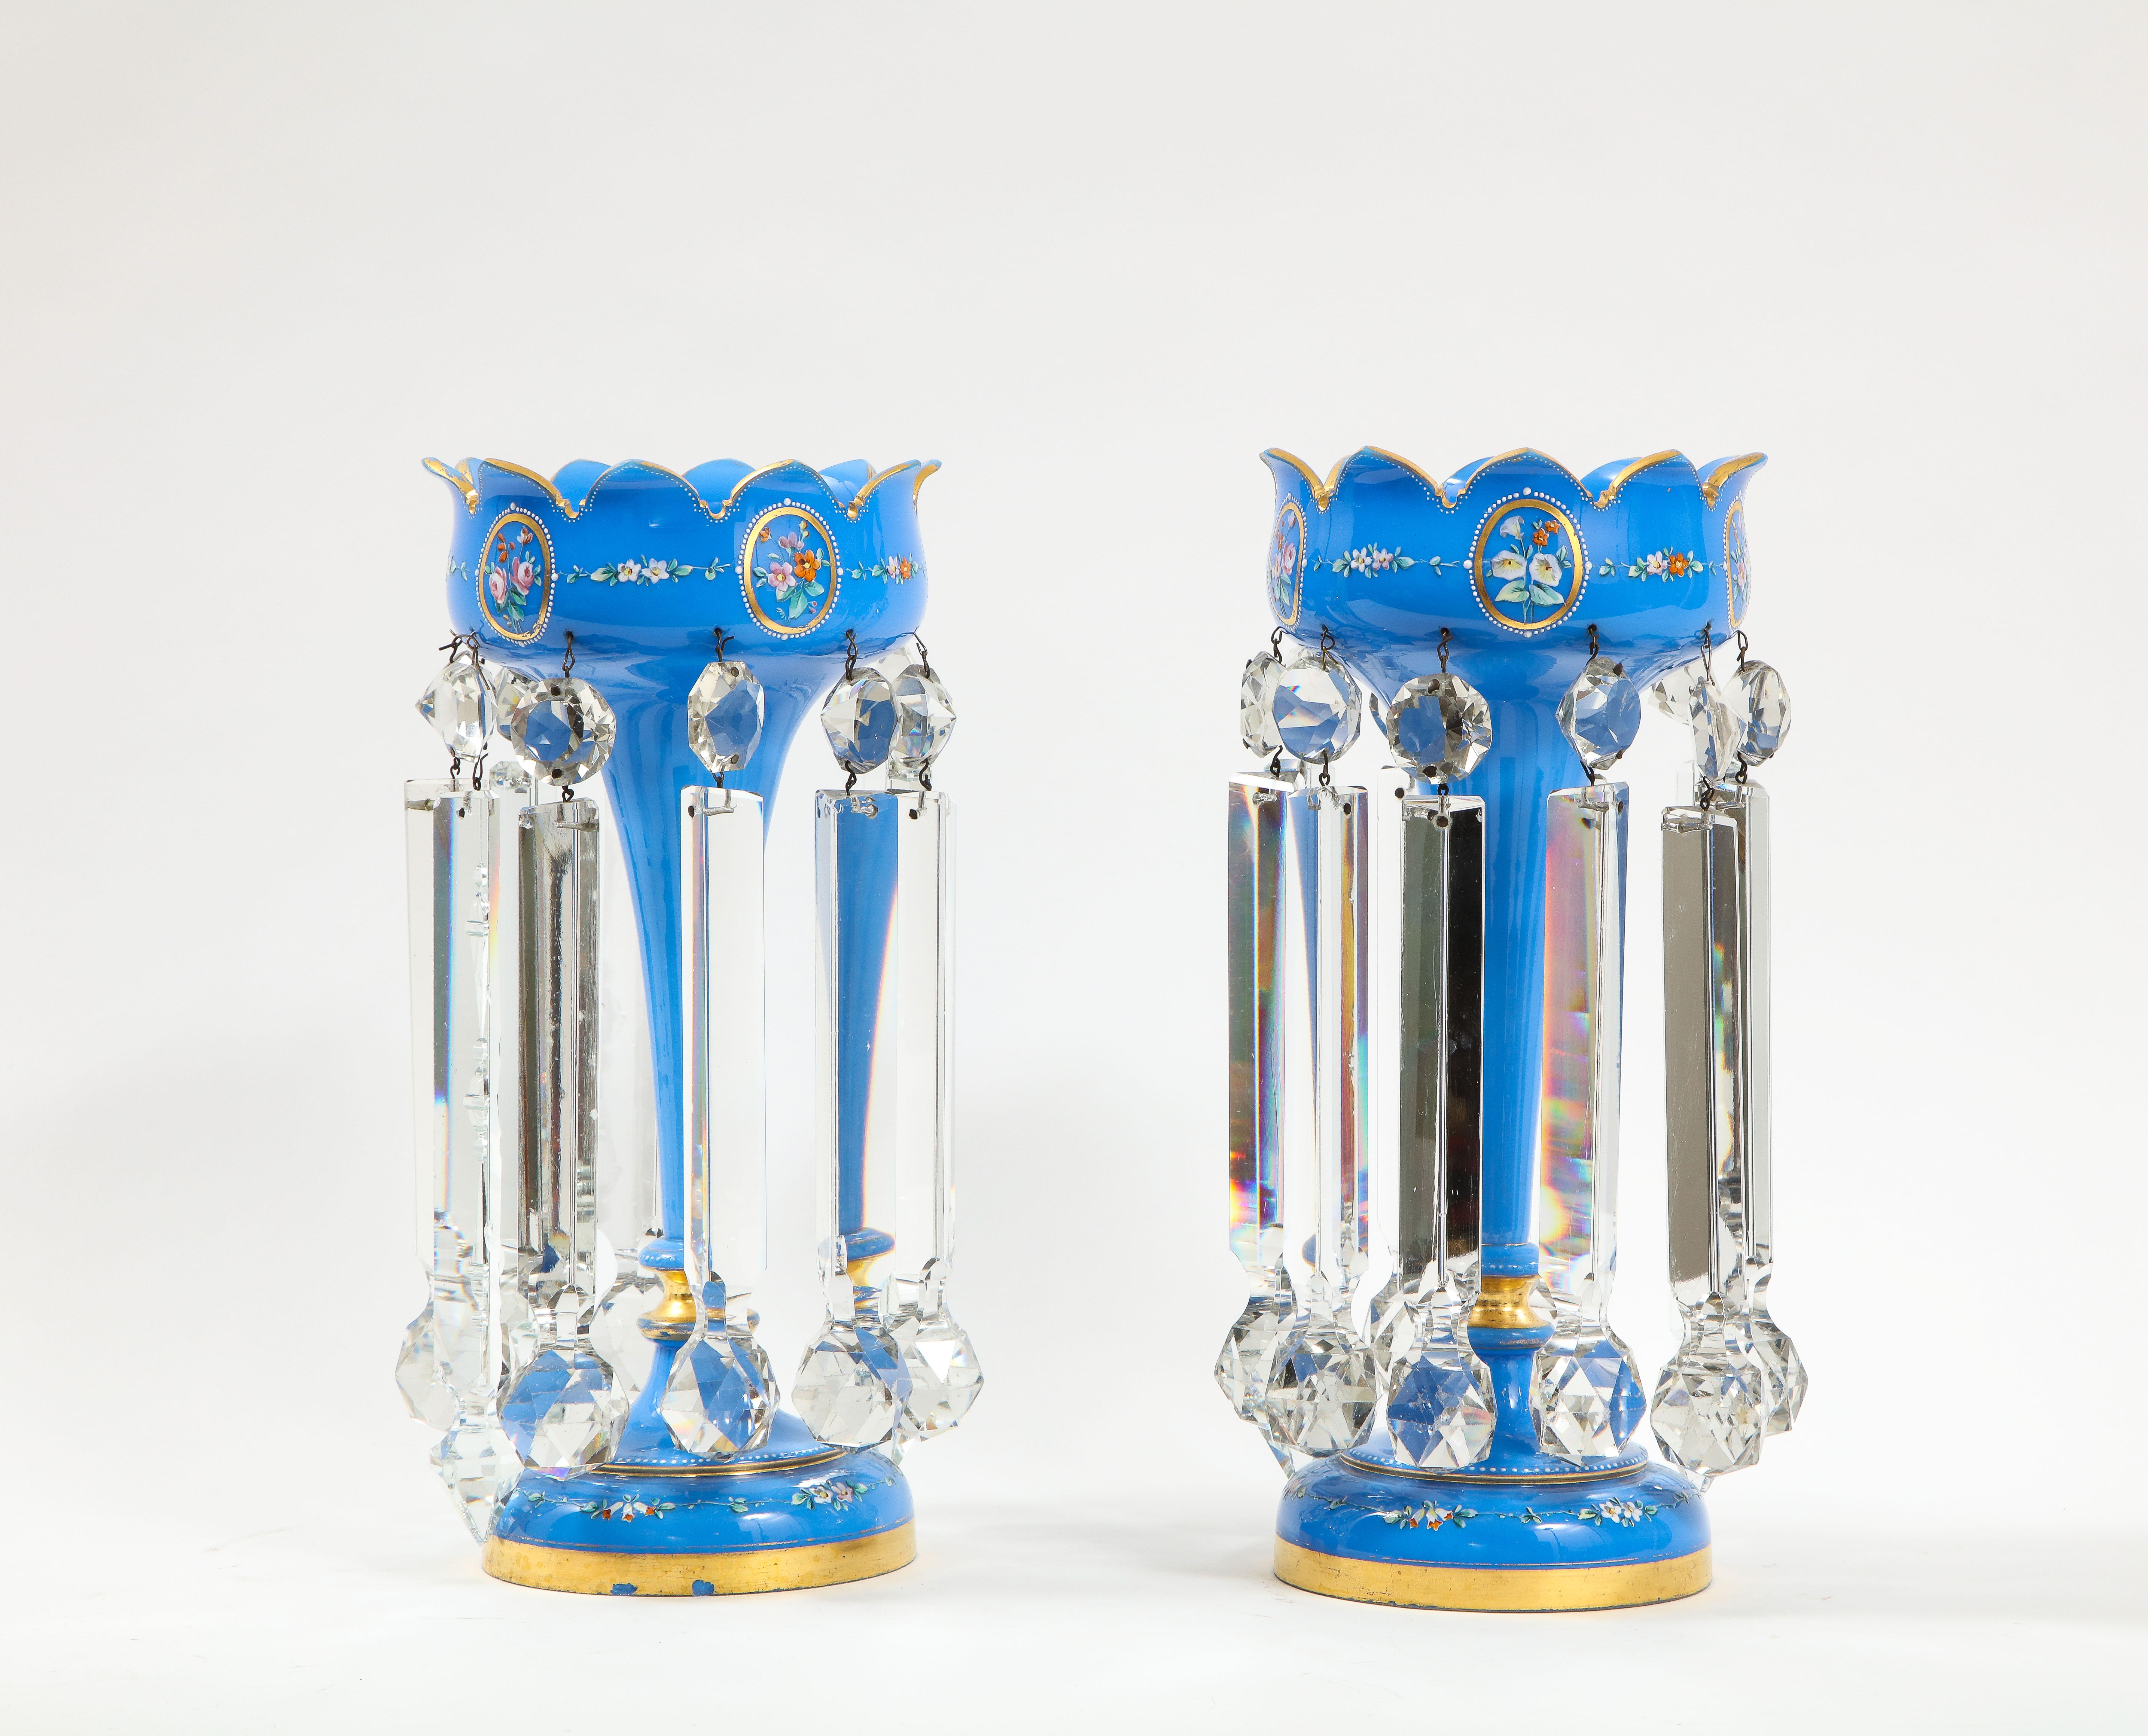 An exquisite pair of French 19th century Louis XVI style blue opalescent crystal tulip form lustre/girandole/candle sticks with hand-painted enamel designs and gilt decoration. Each luster is beautifully hand-carved from the finest blue opalescent